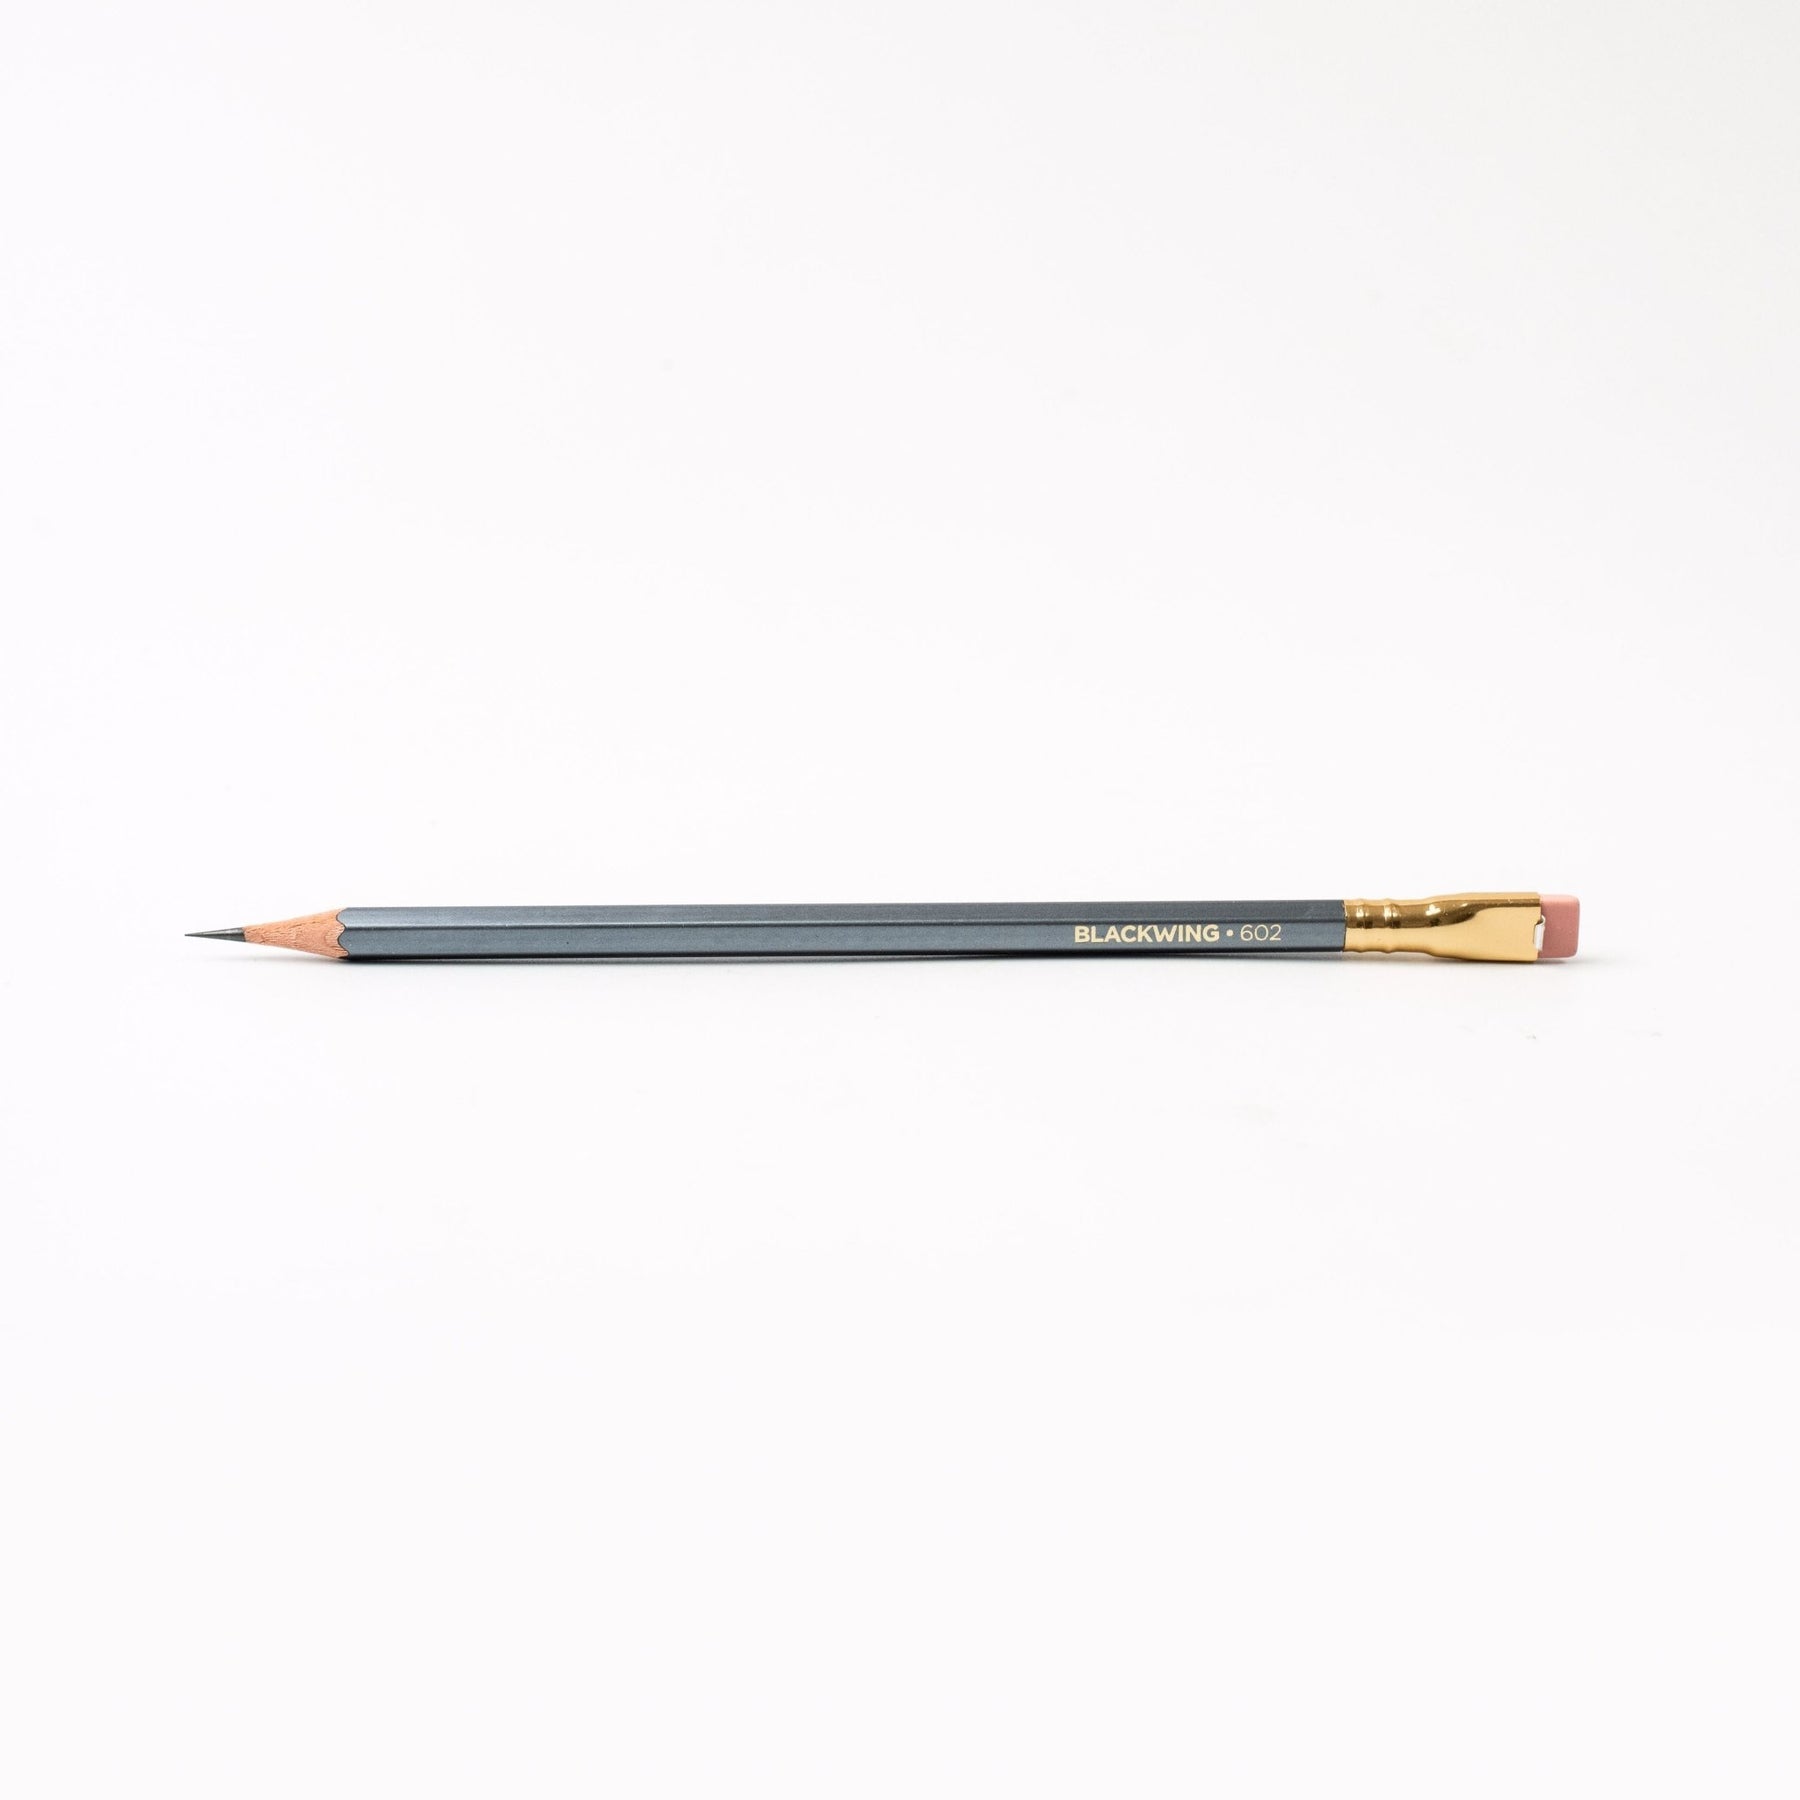 Palomino Blackwing 602 Pencils - Firm Lead and Pink Eraser - Box of 12 - merriartist.com